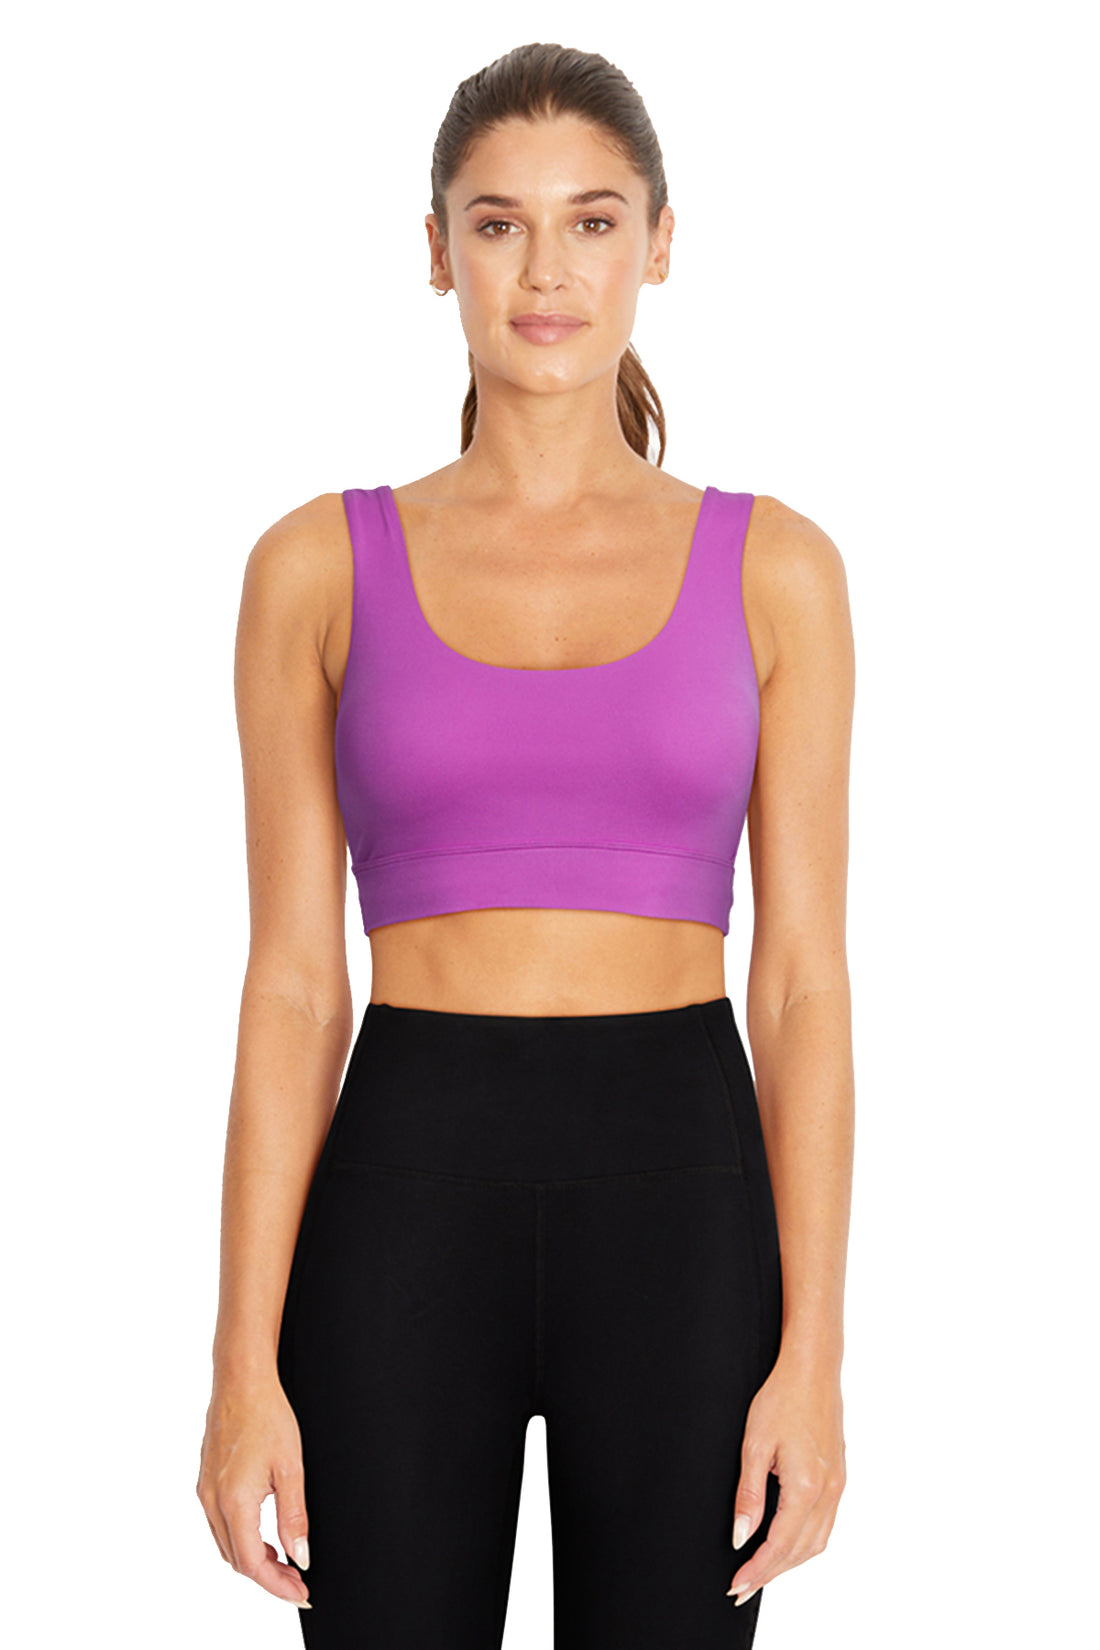 Buy online Black Solid Hosery Sports Bra from lingerie for Women by Elina  for ₹309 at 38% off